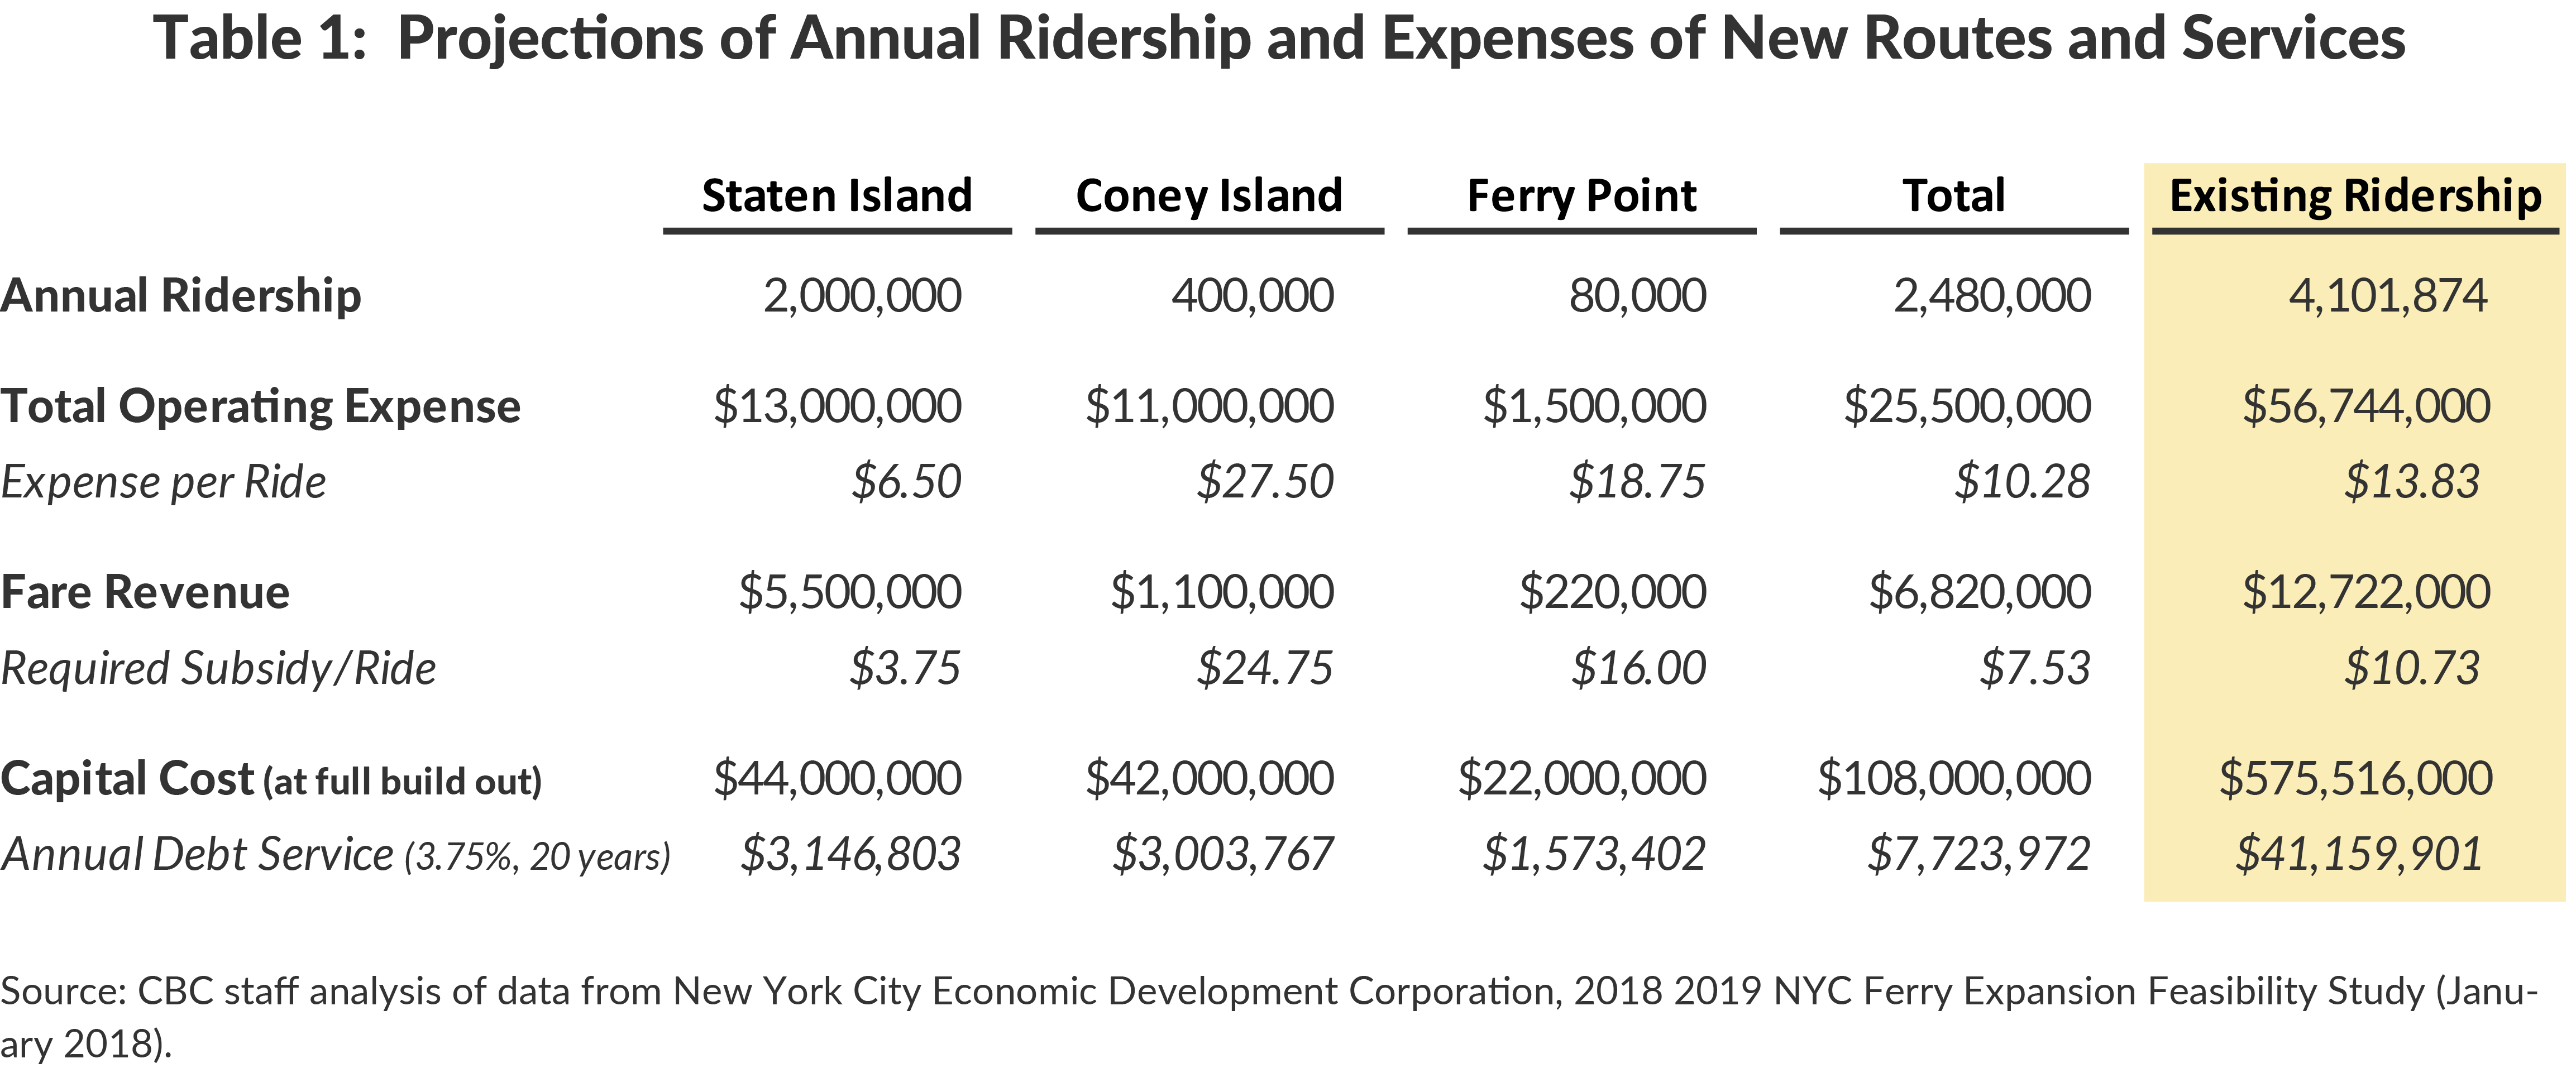 Table 1:  Projections of Annual Ridership and Expenses of New Routes and Services